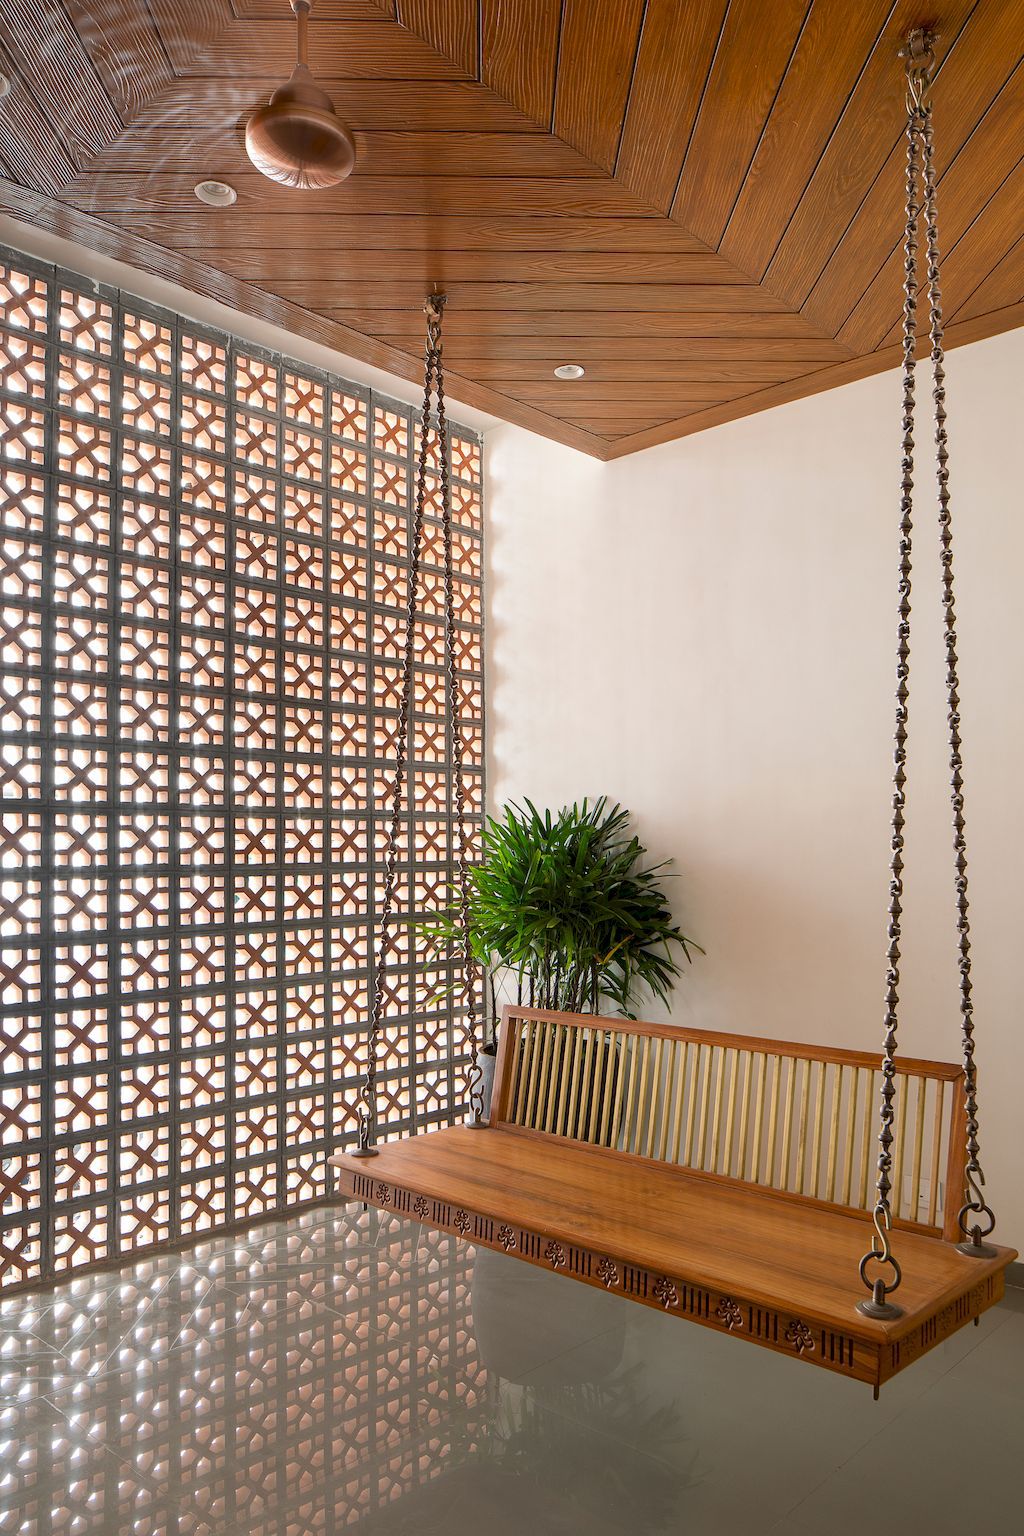 Brick Screen house in charm traditional style in India by MS Design Studio